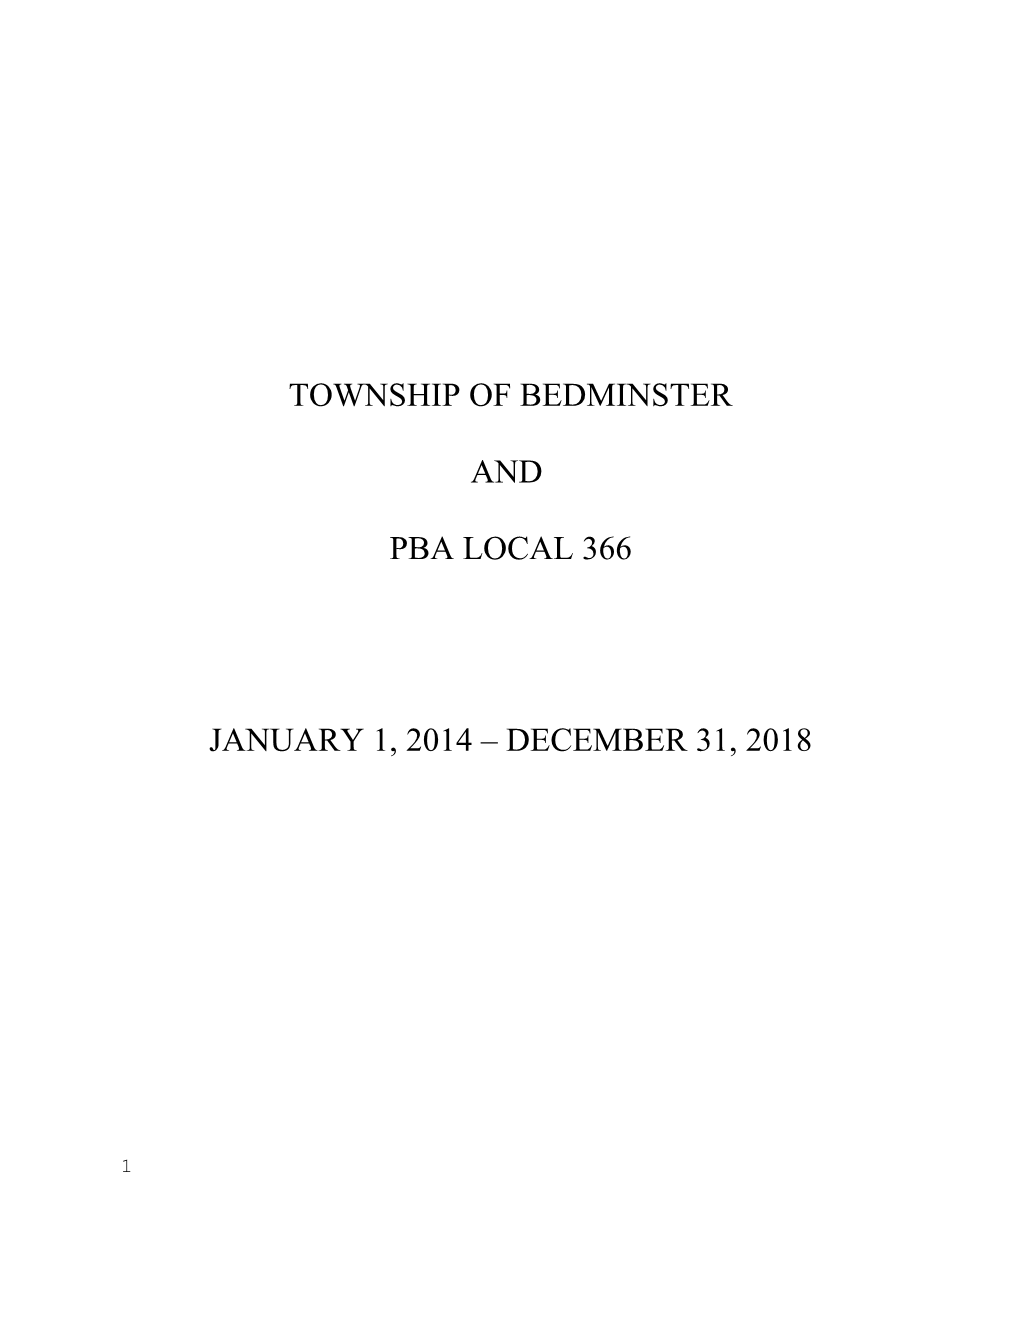 Township of Bedminster